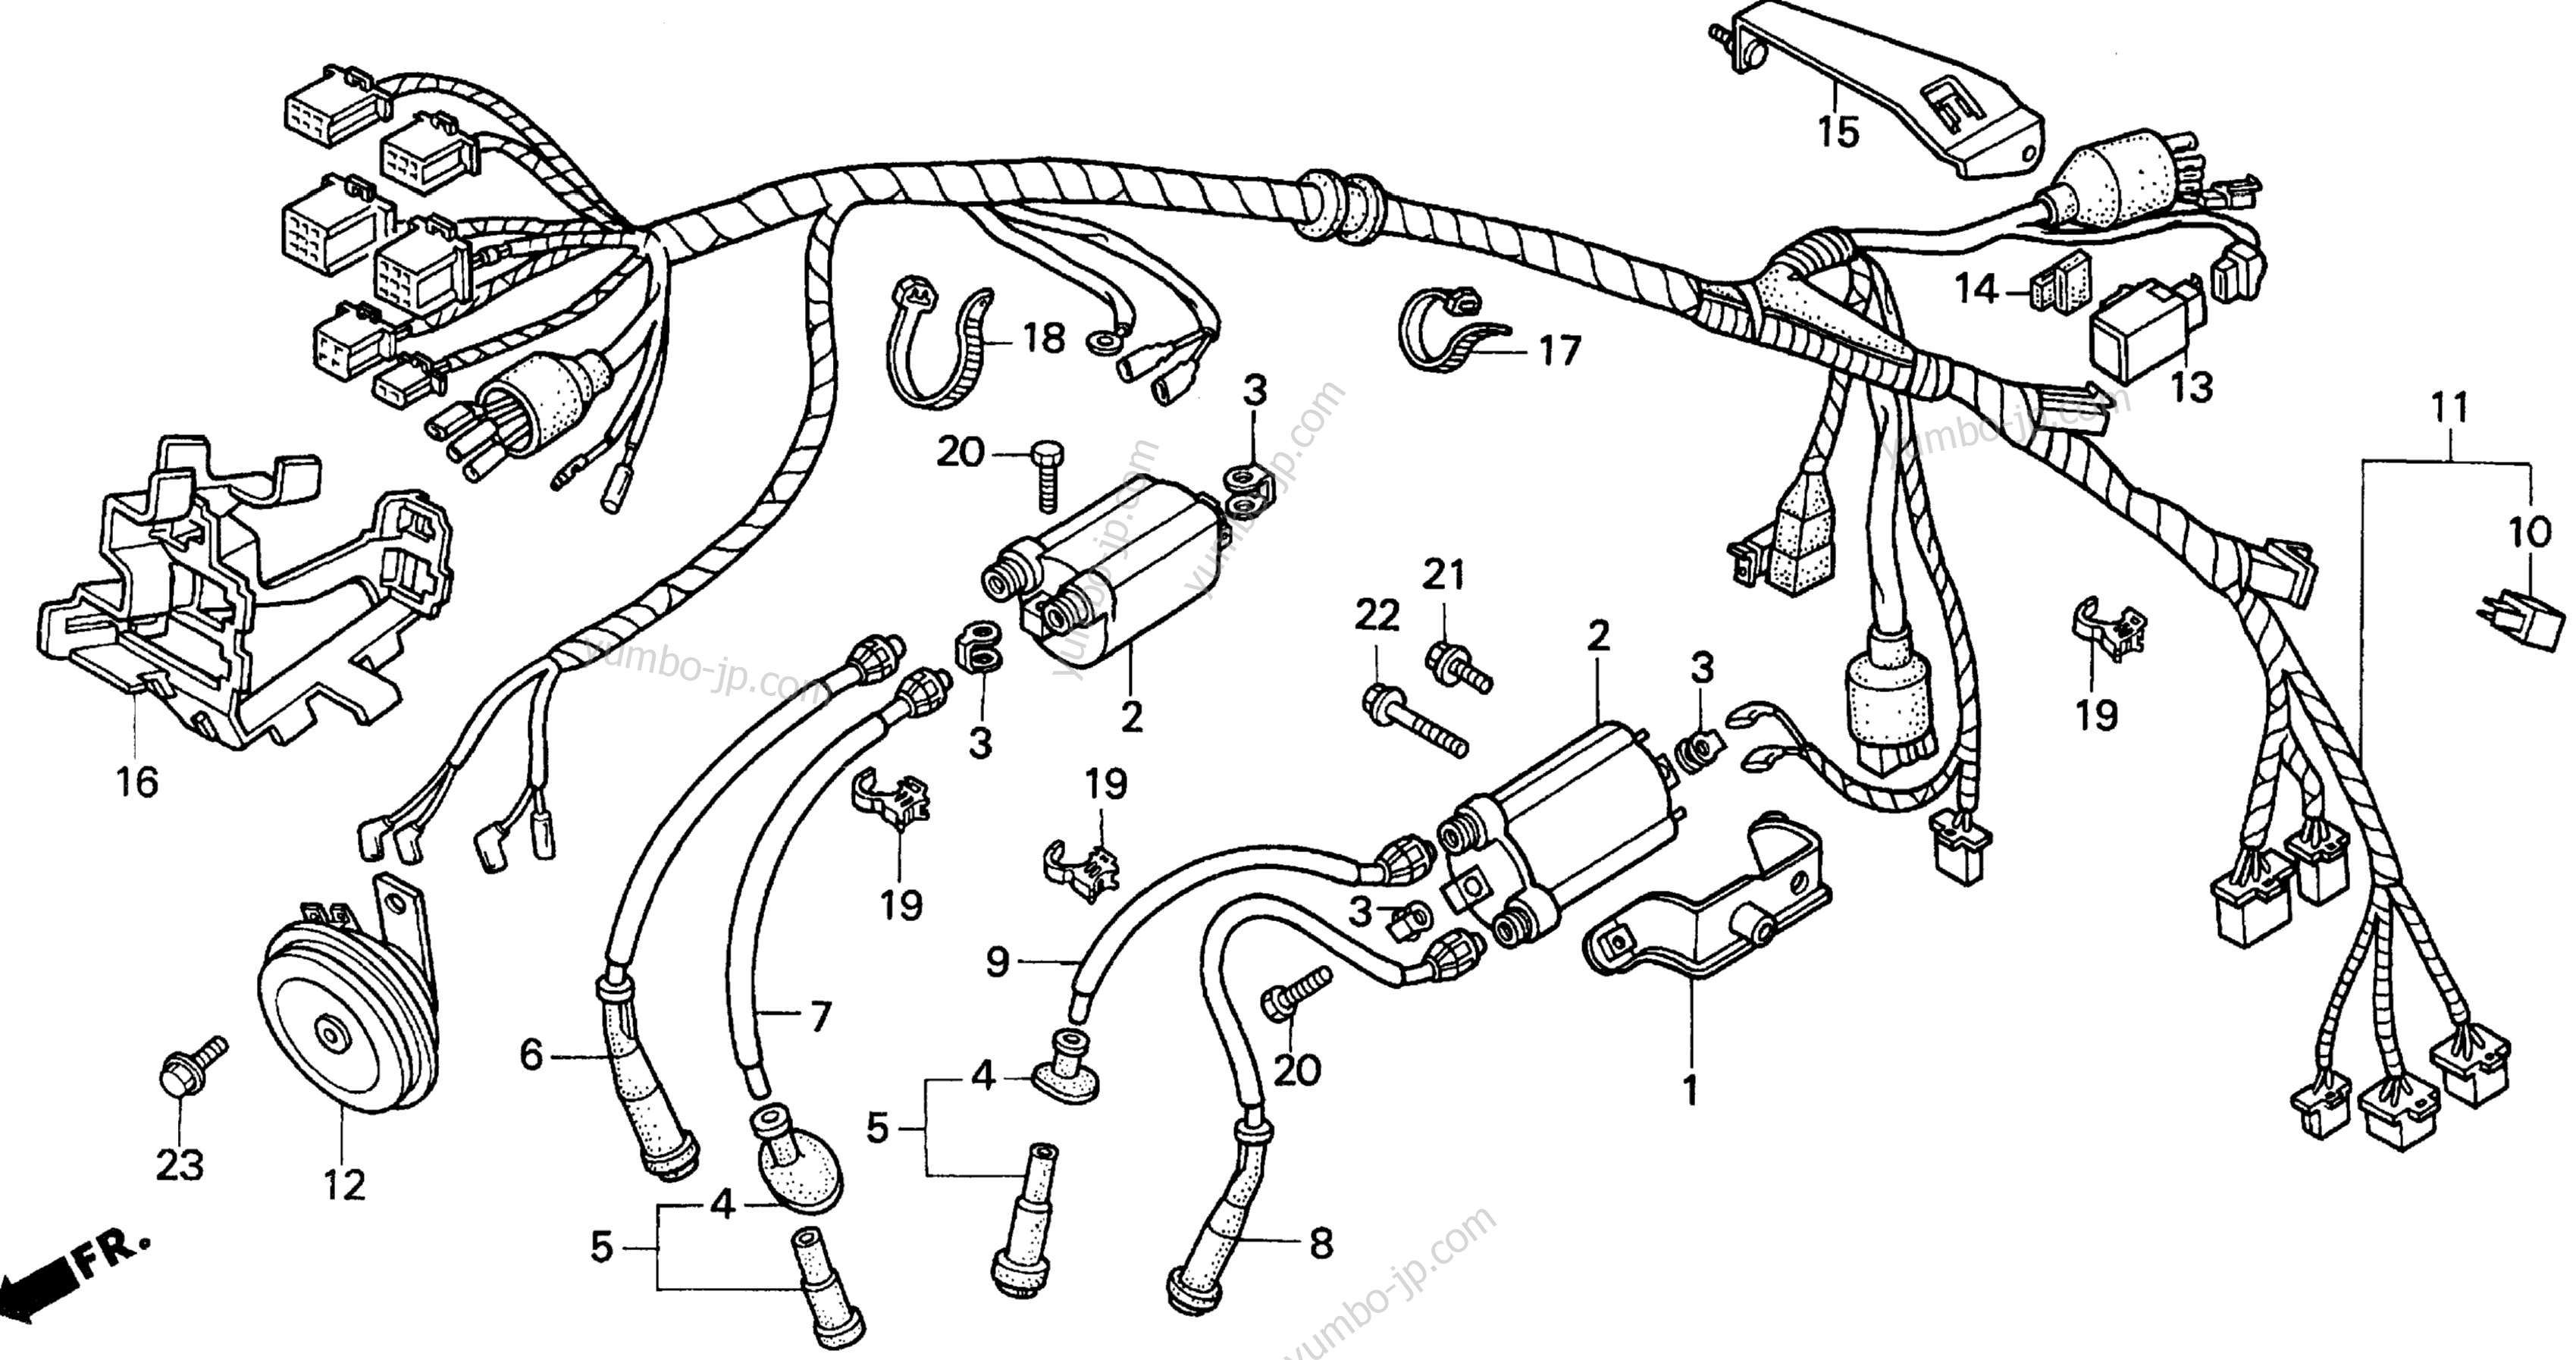 WIRE HARNESS for motorcycles HONDA VT600CD2 AC 2000 year